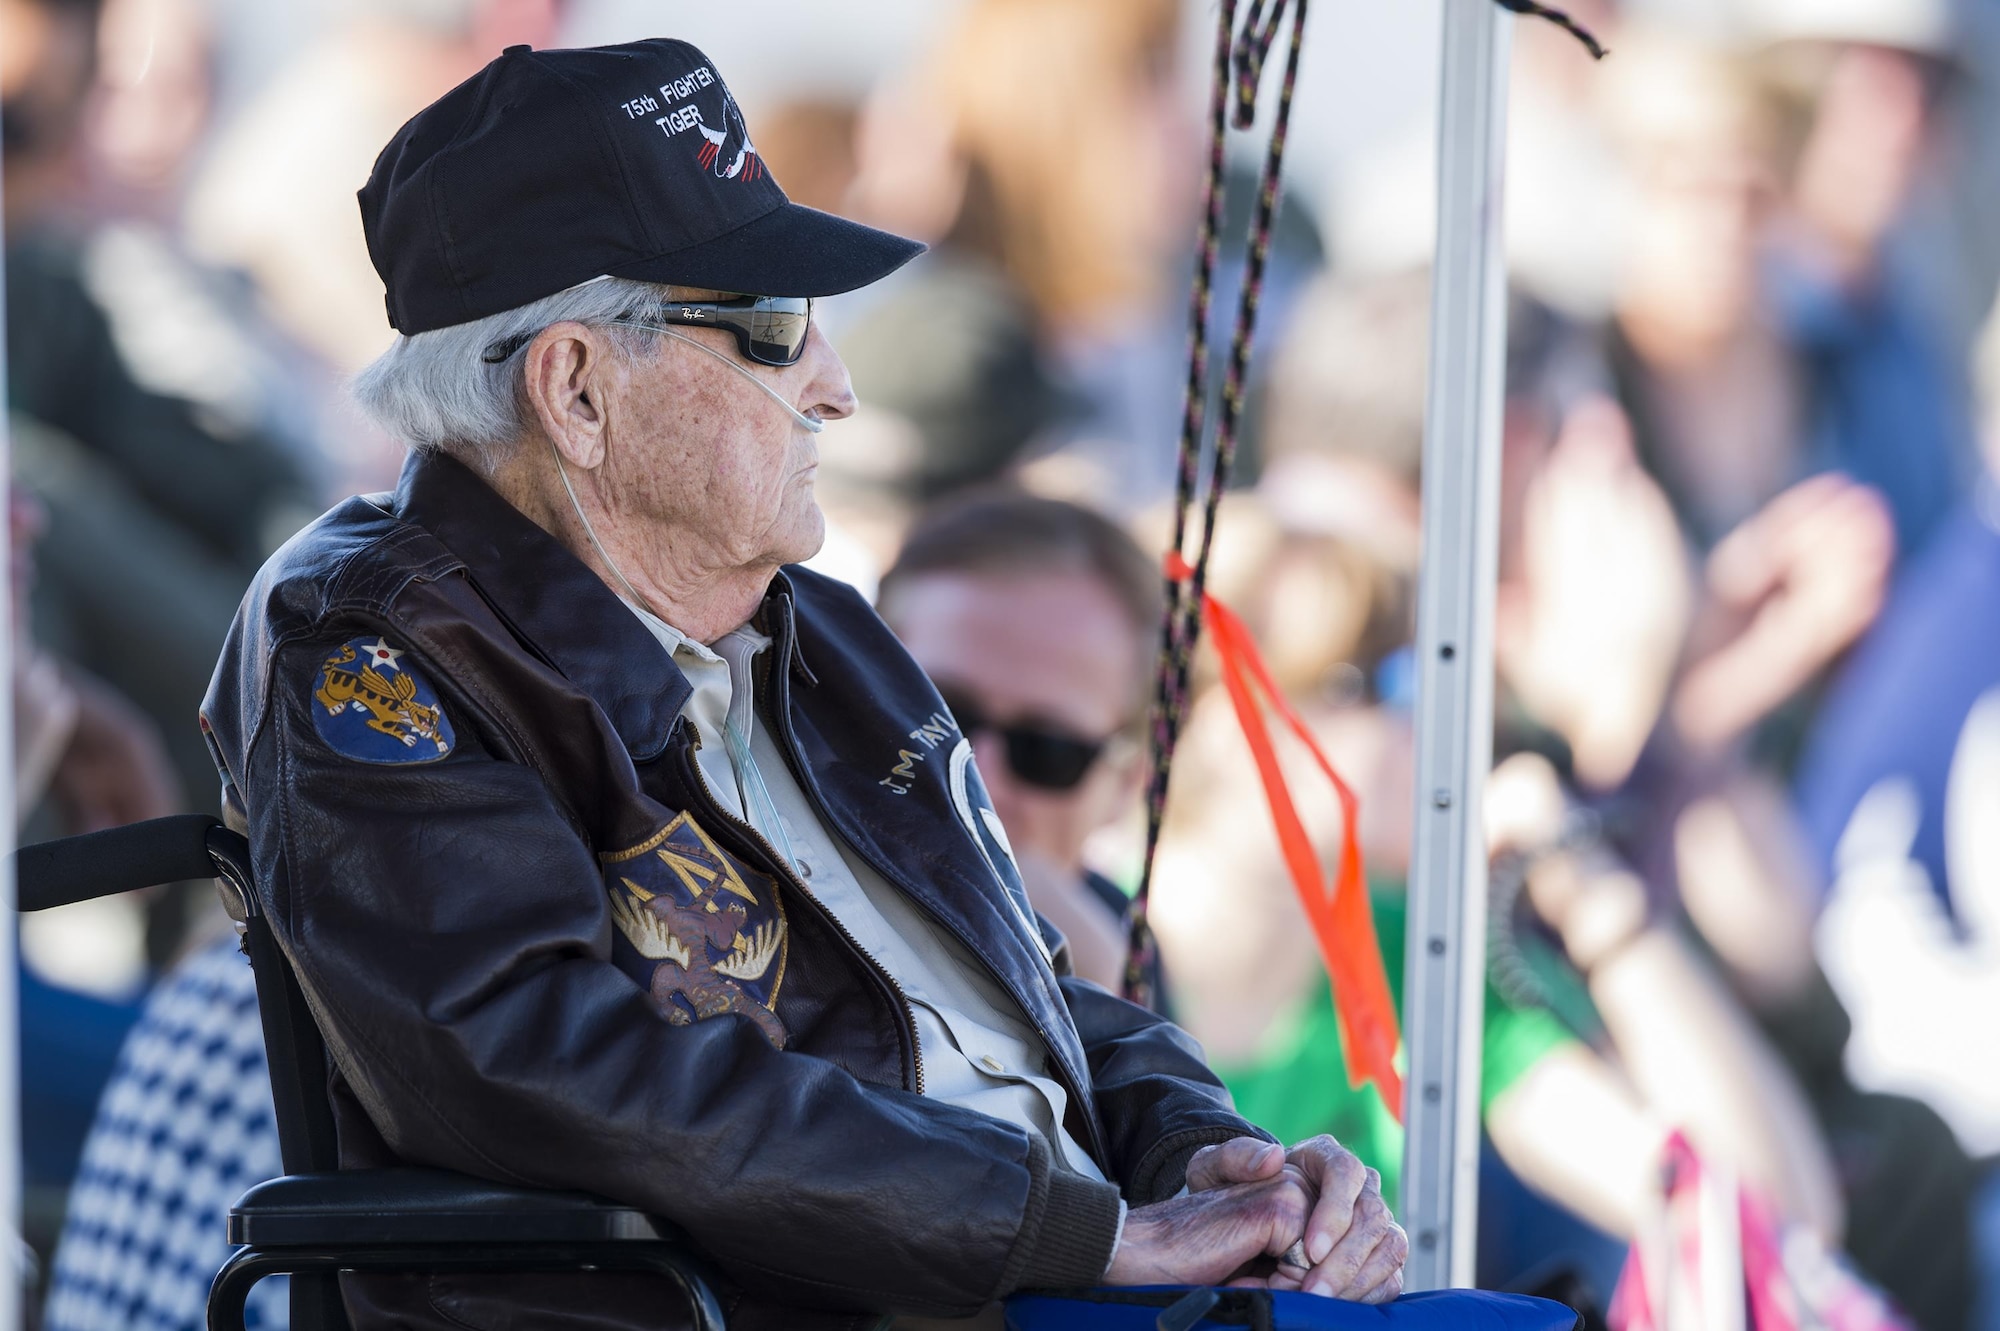 J.M. Taylor, World War II veteran and prisoner of war, watches a combat search and rescue demonstration during the 75th Anniversary Flying Tiger Reunion, March 10, 2017, at Moody Air Force Base, Ga. In 1941, President Roosevelt signed an executive order forming the American Volunteer Group. The AVG was organized into the 1st, 2nd, and 3rd Pursuit Squadrons and later disbanded and replaced by the 23d Fighter Group in 1942. Under the command of Gen. Claire Chennault, the Flying Tigers comprised of the 74th, 75th, and 76th Pursuit Squadrons defended China against the Japanese. Throughout World War II, the Flying Tigers achieved combat success and flew the US-made Curtiss P-40 Warhawks painted with the shark-mouth design. (U.S. Air Force photo by Senior Airman Ceaira Young)